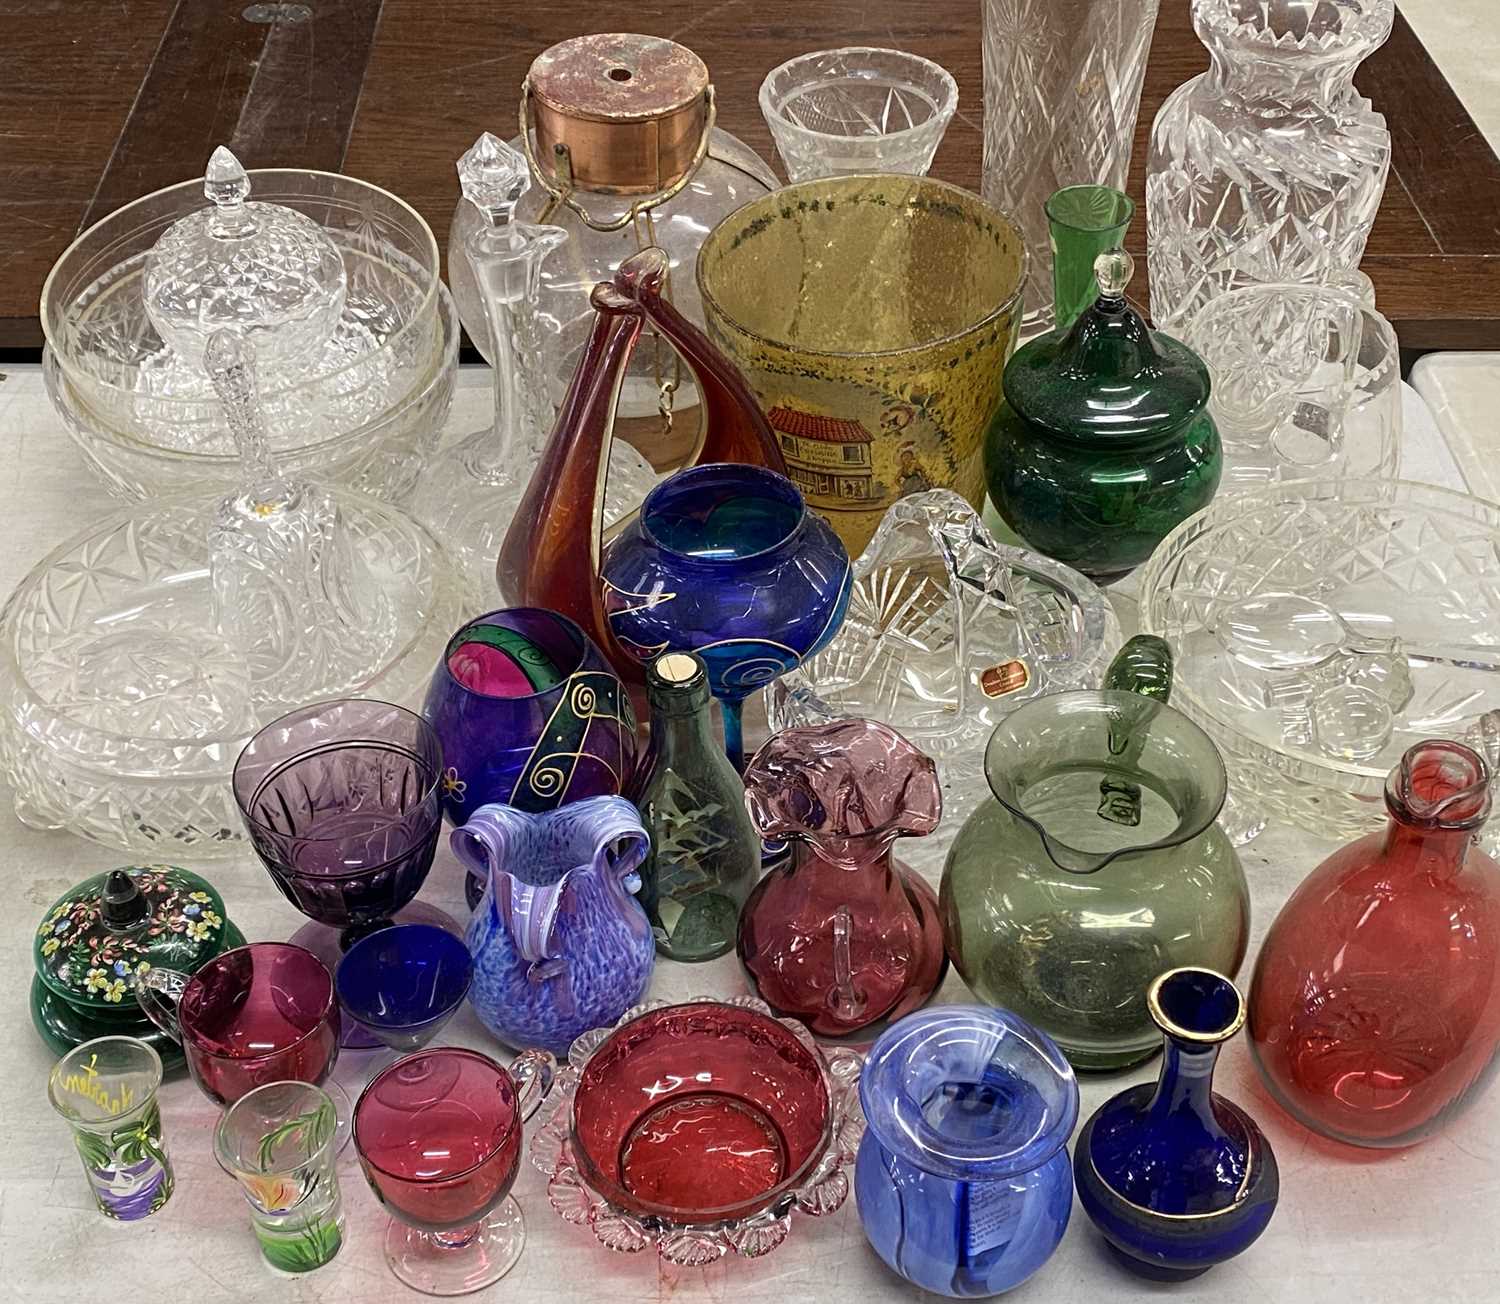 QUANTITY OF CUT GLASSWARE & COLOURED GLASSWARE including decanters, bowls, vases, and other